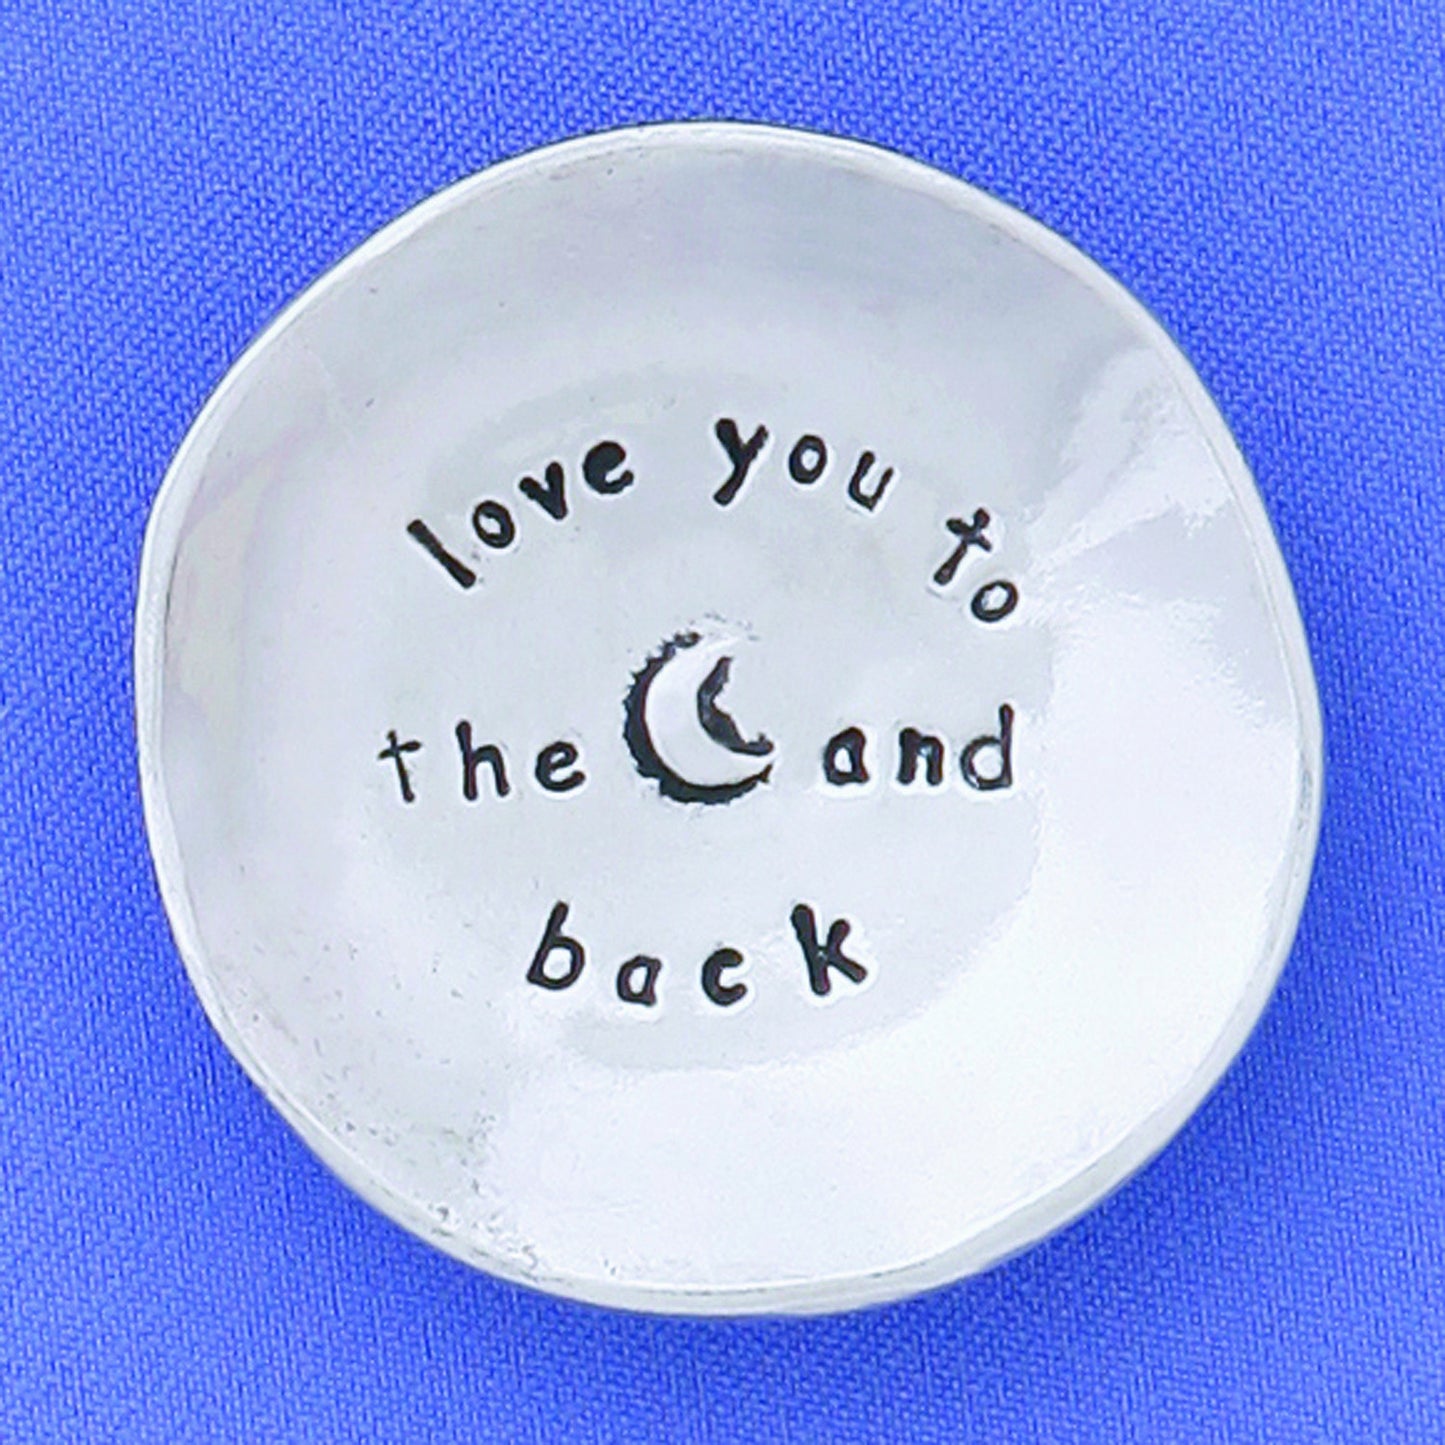 Pewter Trinket Dish "Love You to the Moon and Back"